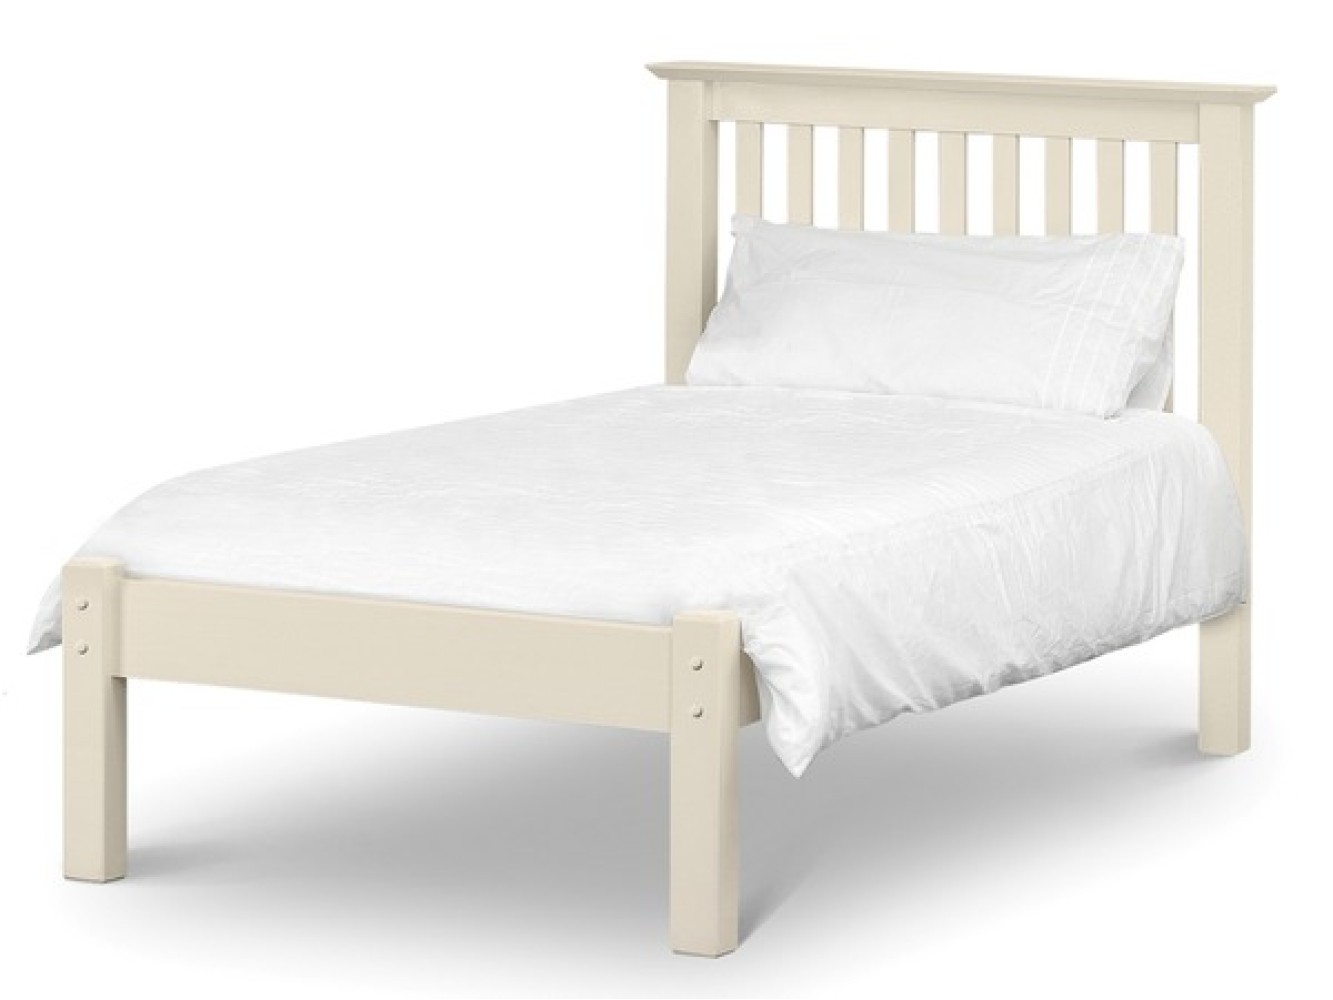 Barcelona Stone White Low Foot End Bedstead